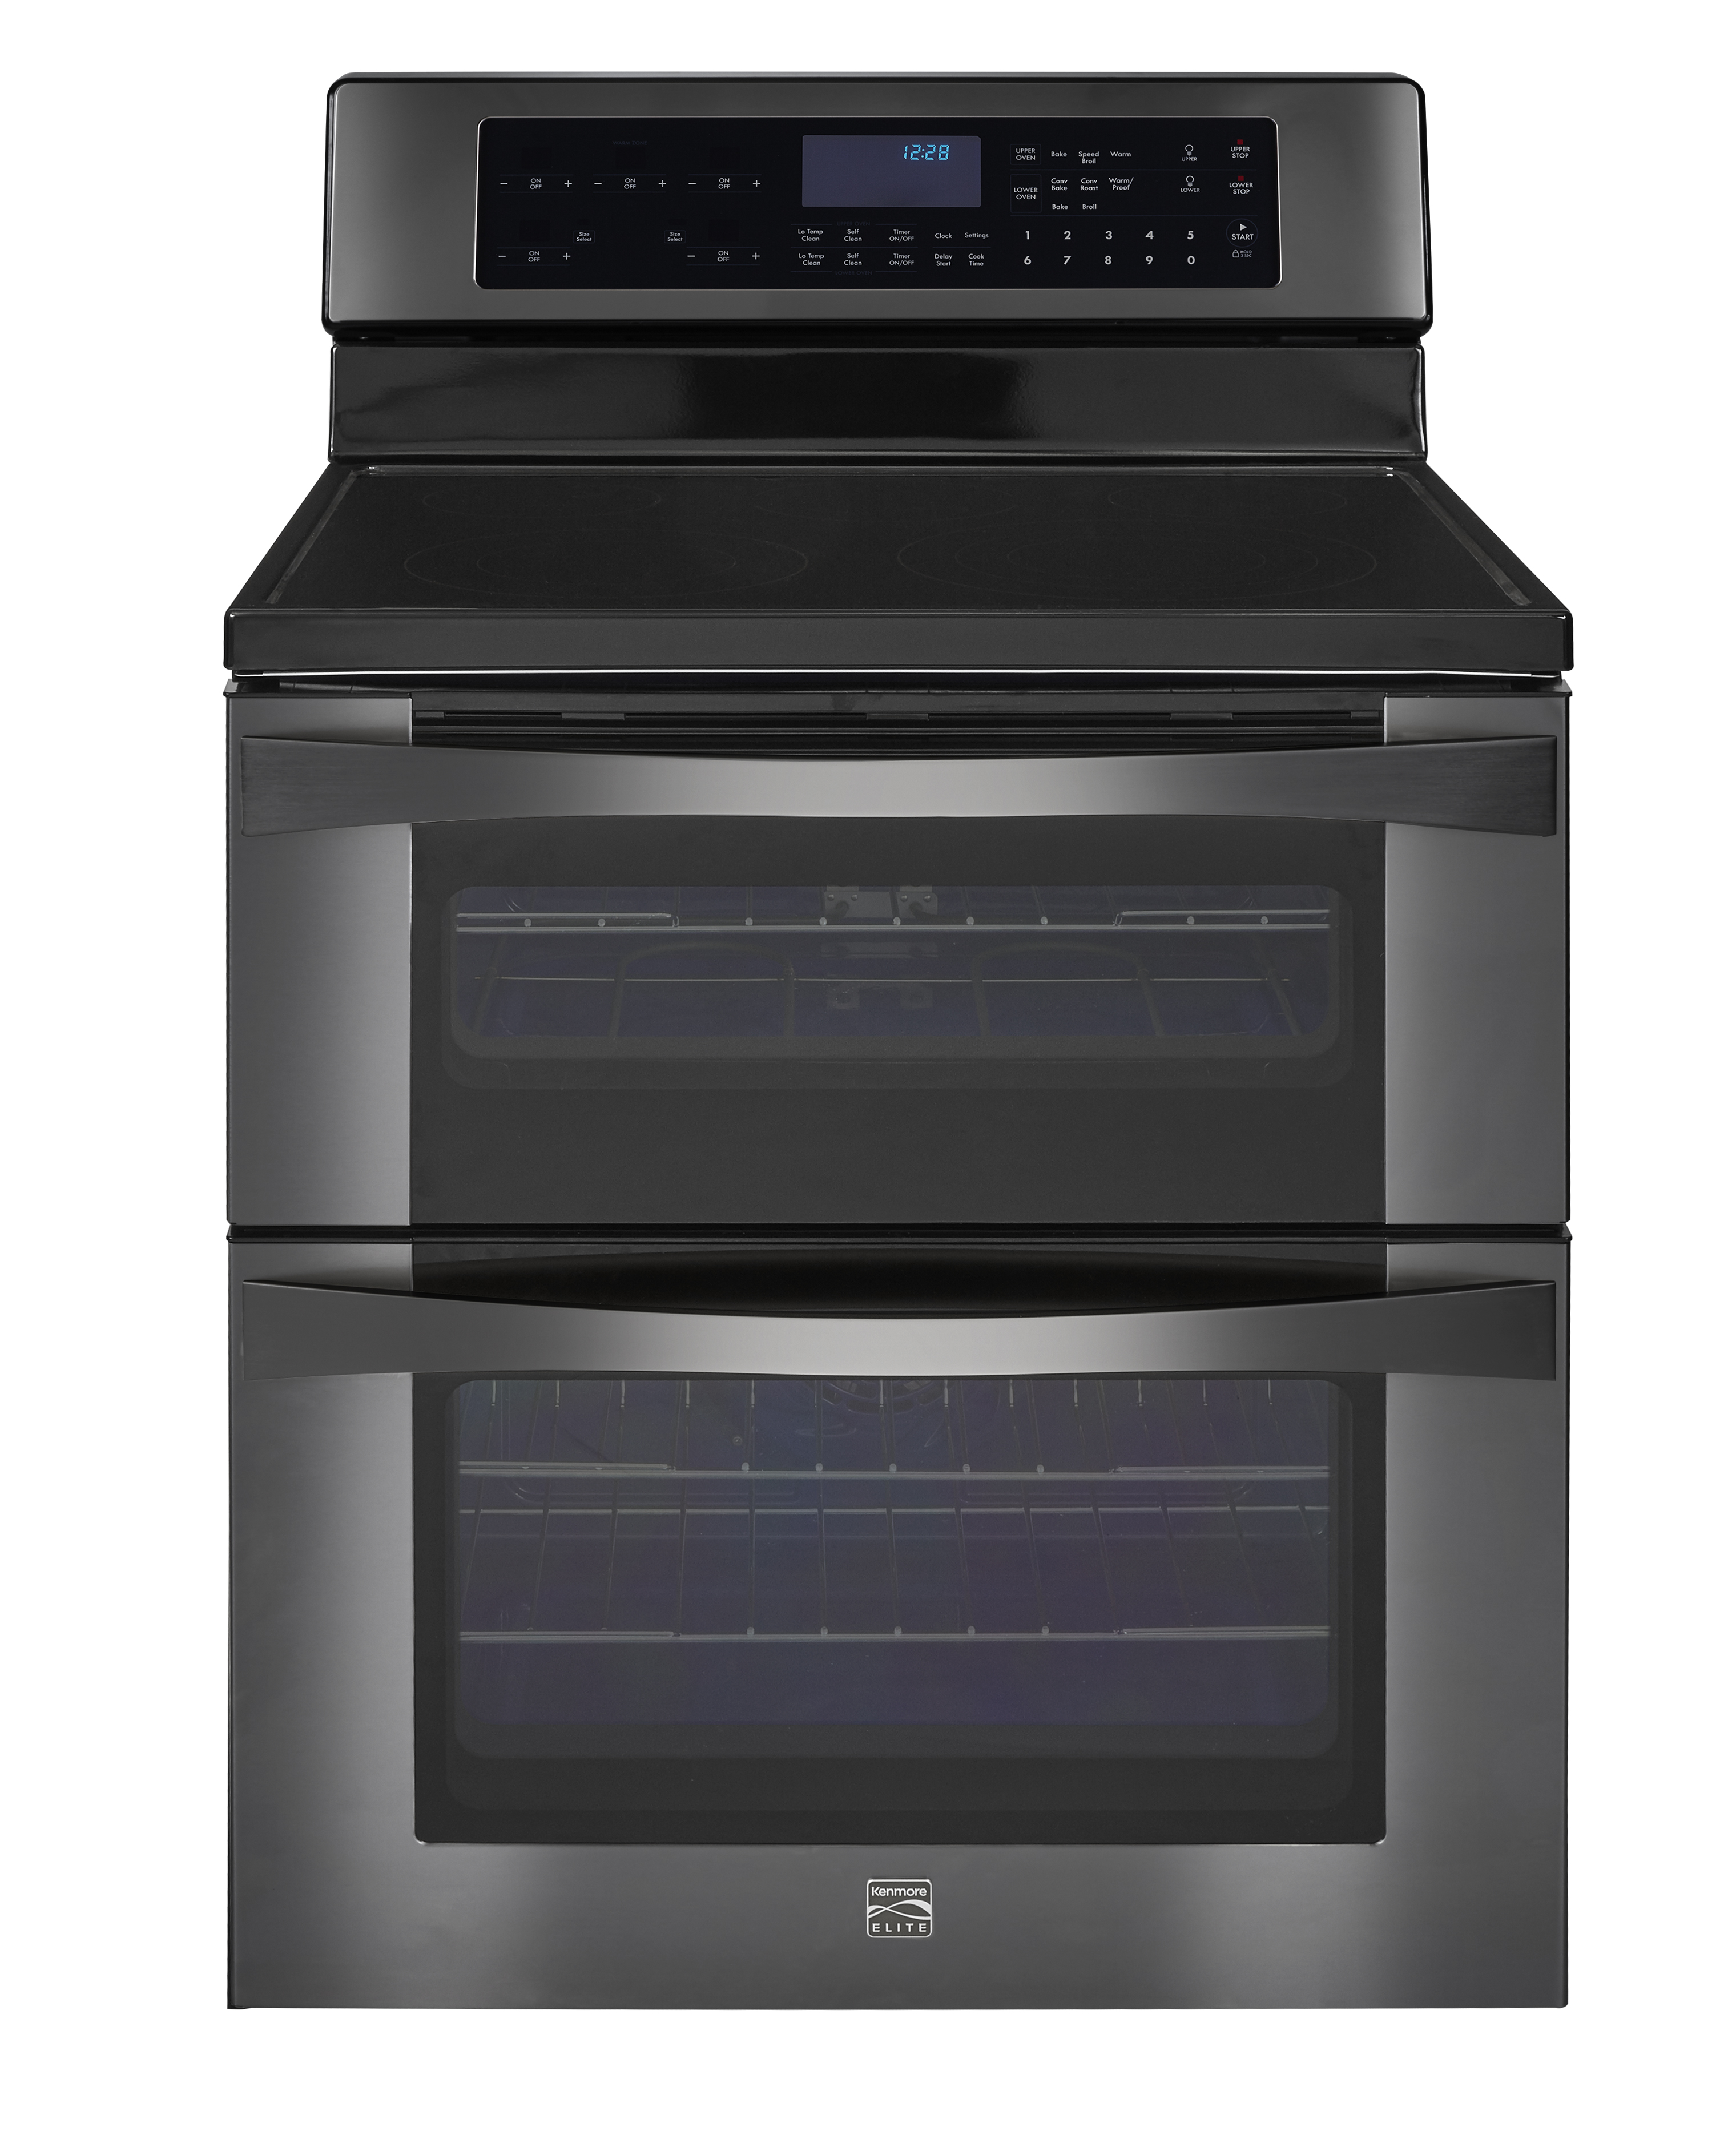 Kenmore Elite 96047 6.7 cu. ft. Electric Double Oven Range with True Convection